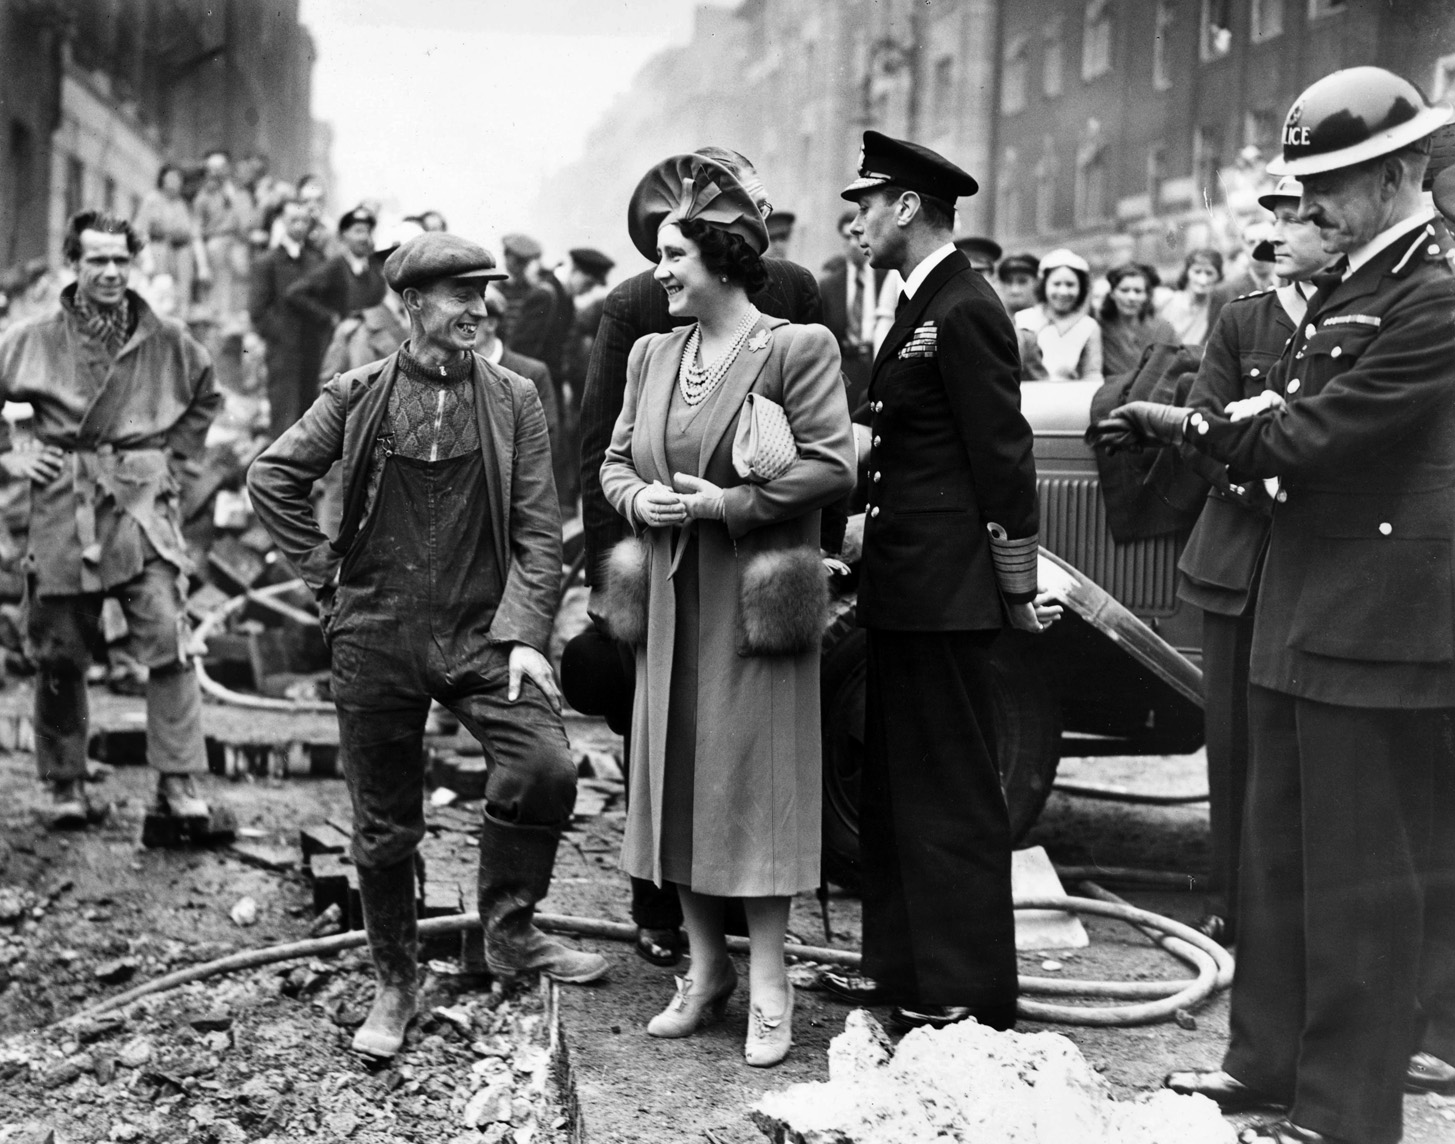 King George IV and Queen Elizabeth talk with workers cleaning up bomb damage, October 18, 1940. After Buckingham Palace was bombed, the Queen said that having the royal residence damaged meant that she could empathize with the ordinary citizens.